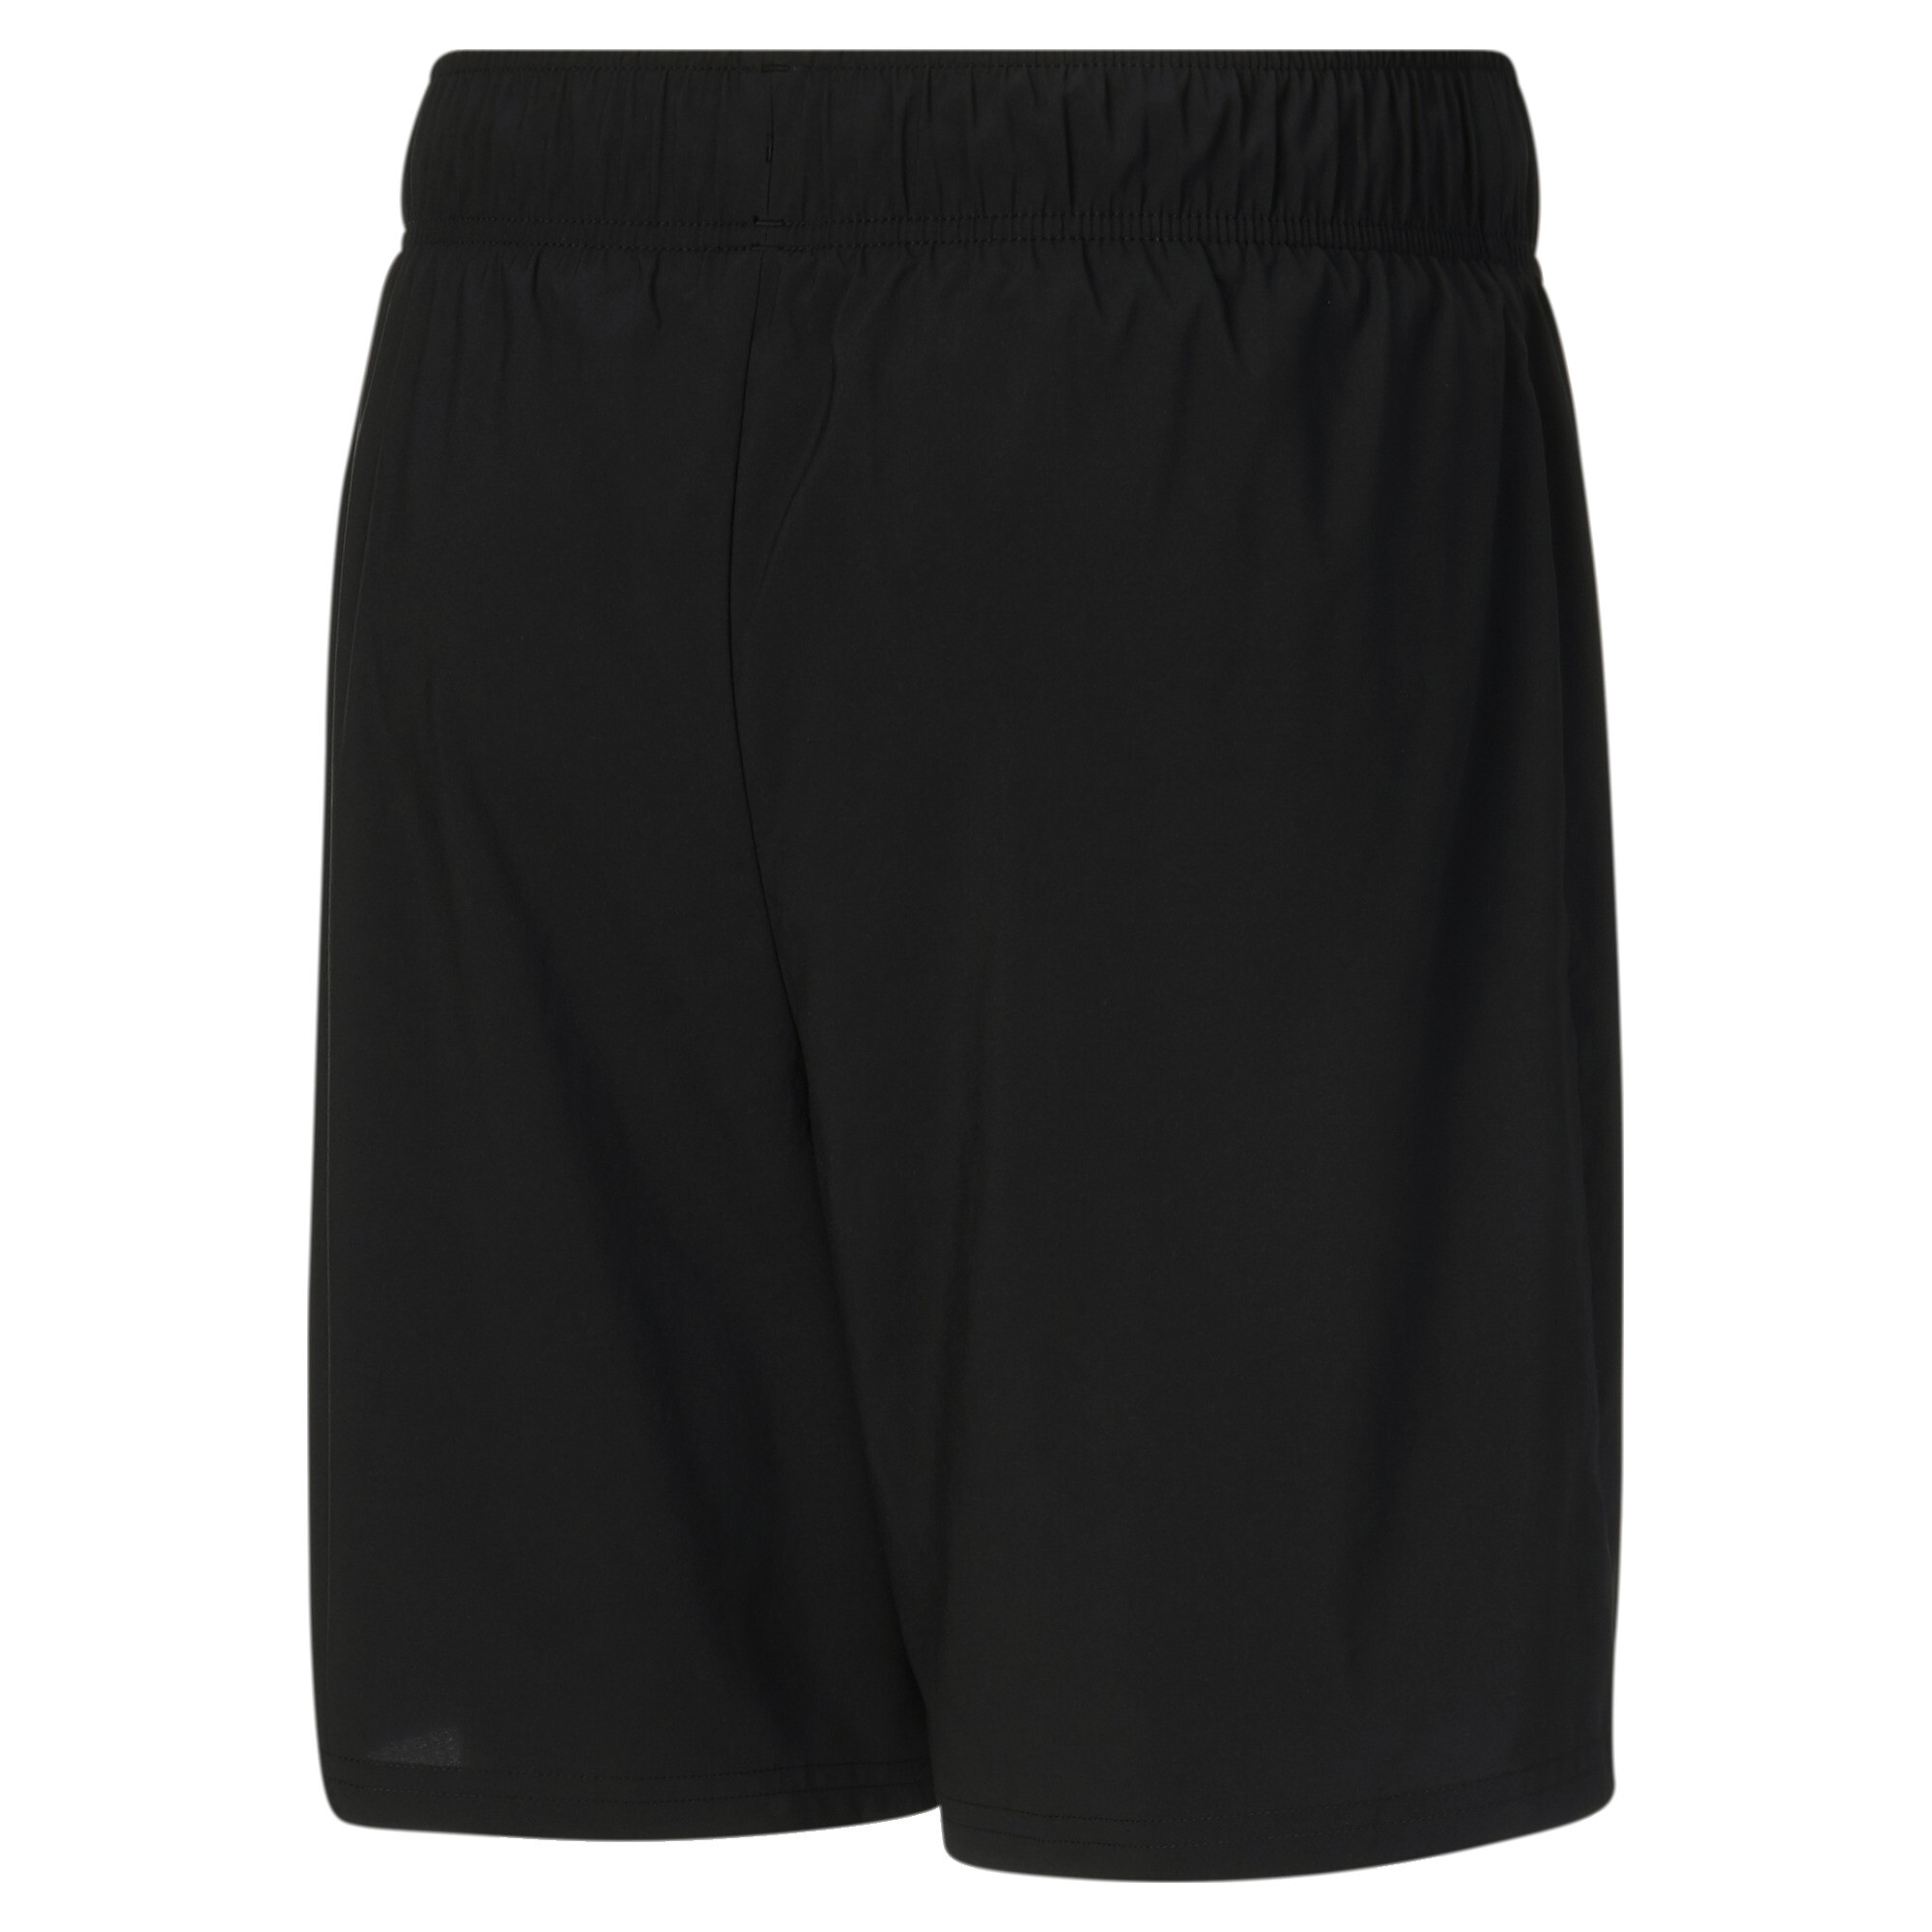 Men's Puma Favourite 2-in-1's Running Shorts, Black, Size 3XL, Clothing